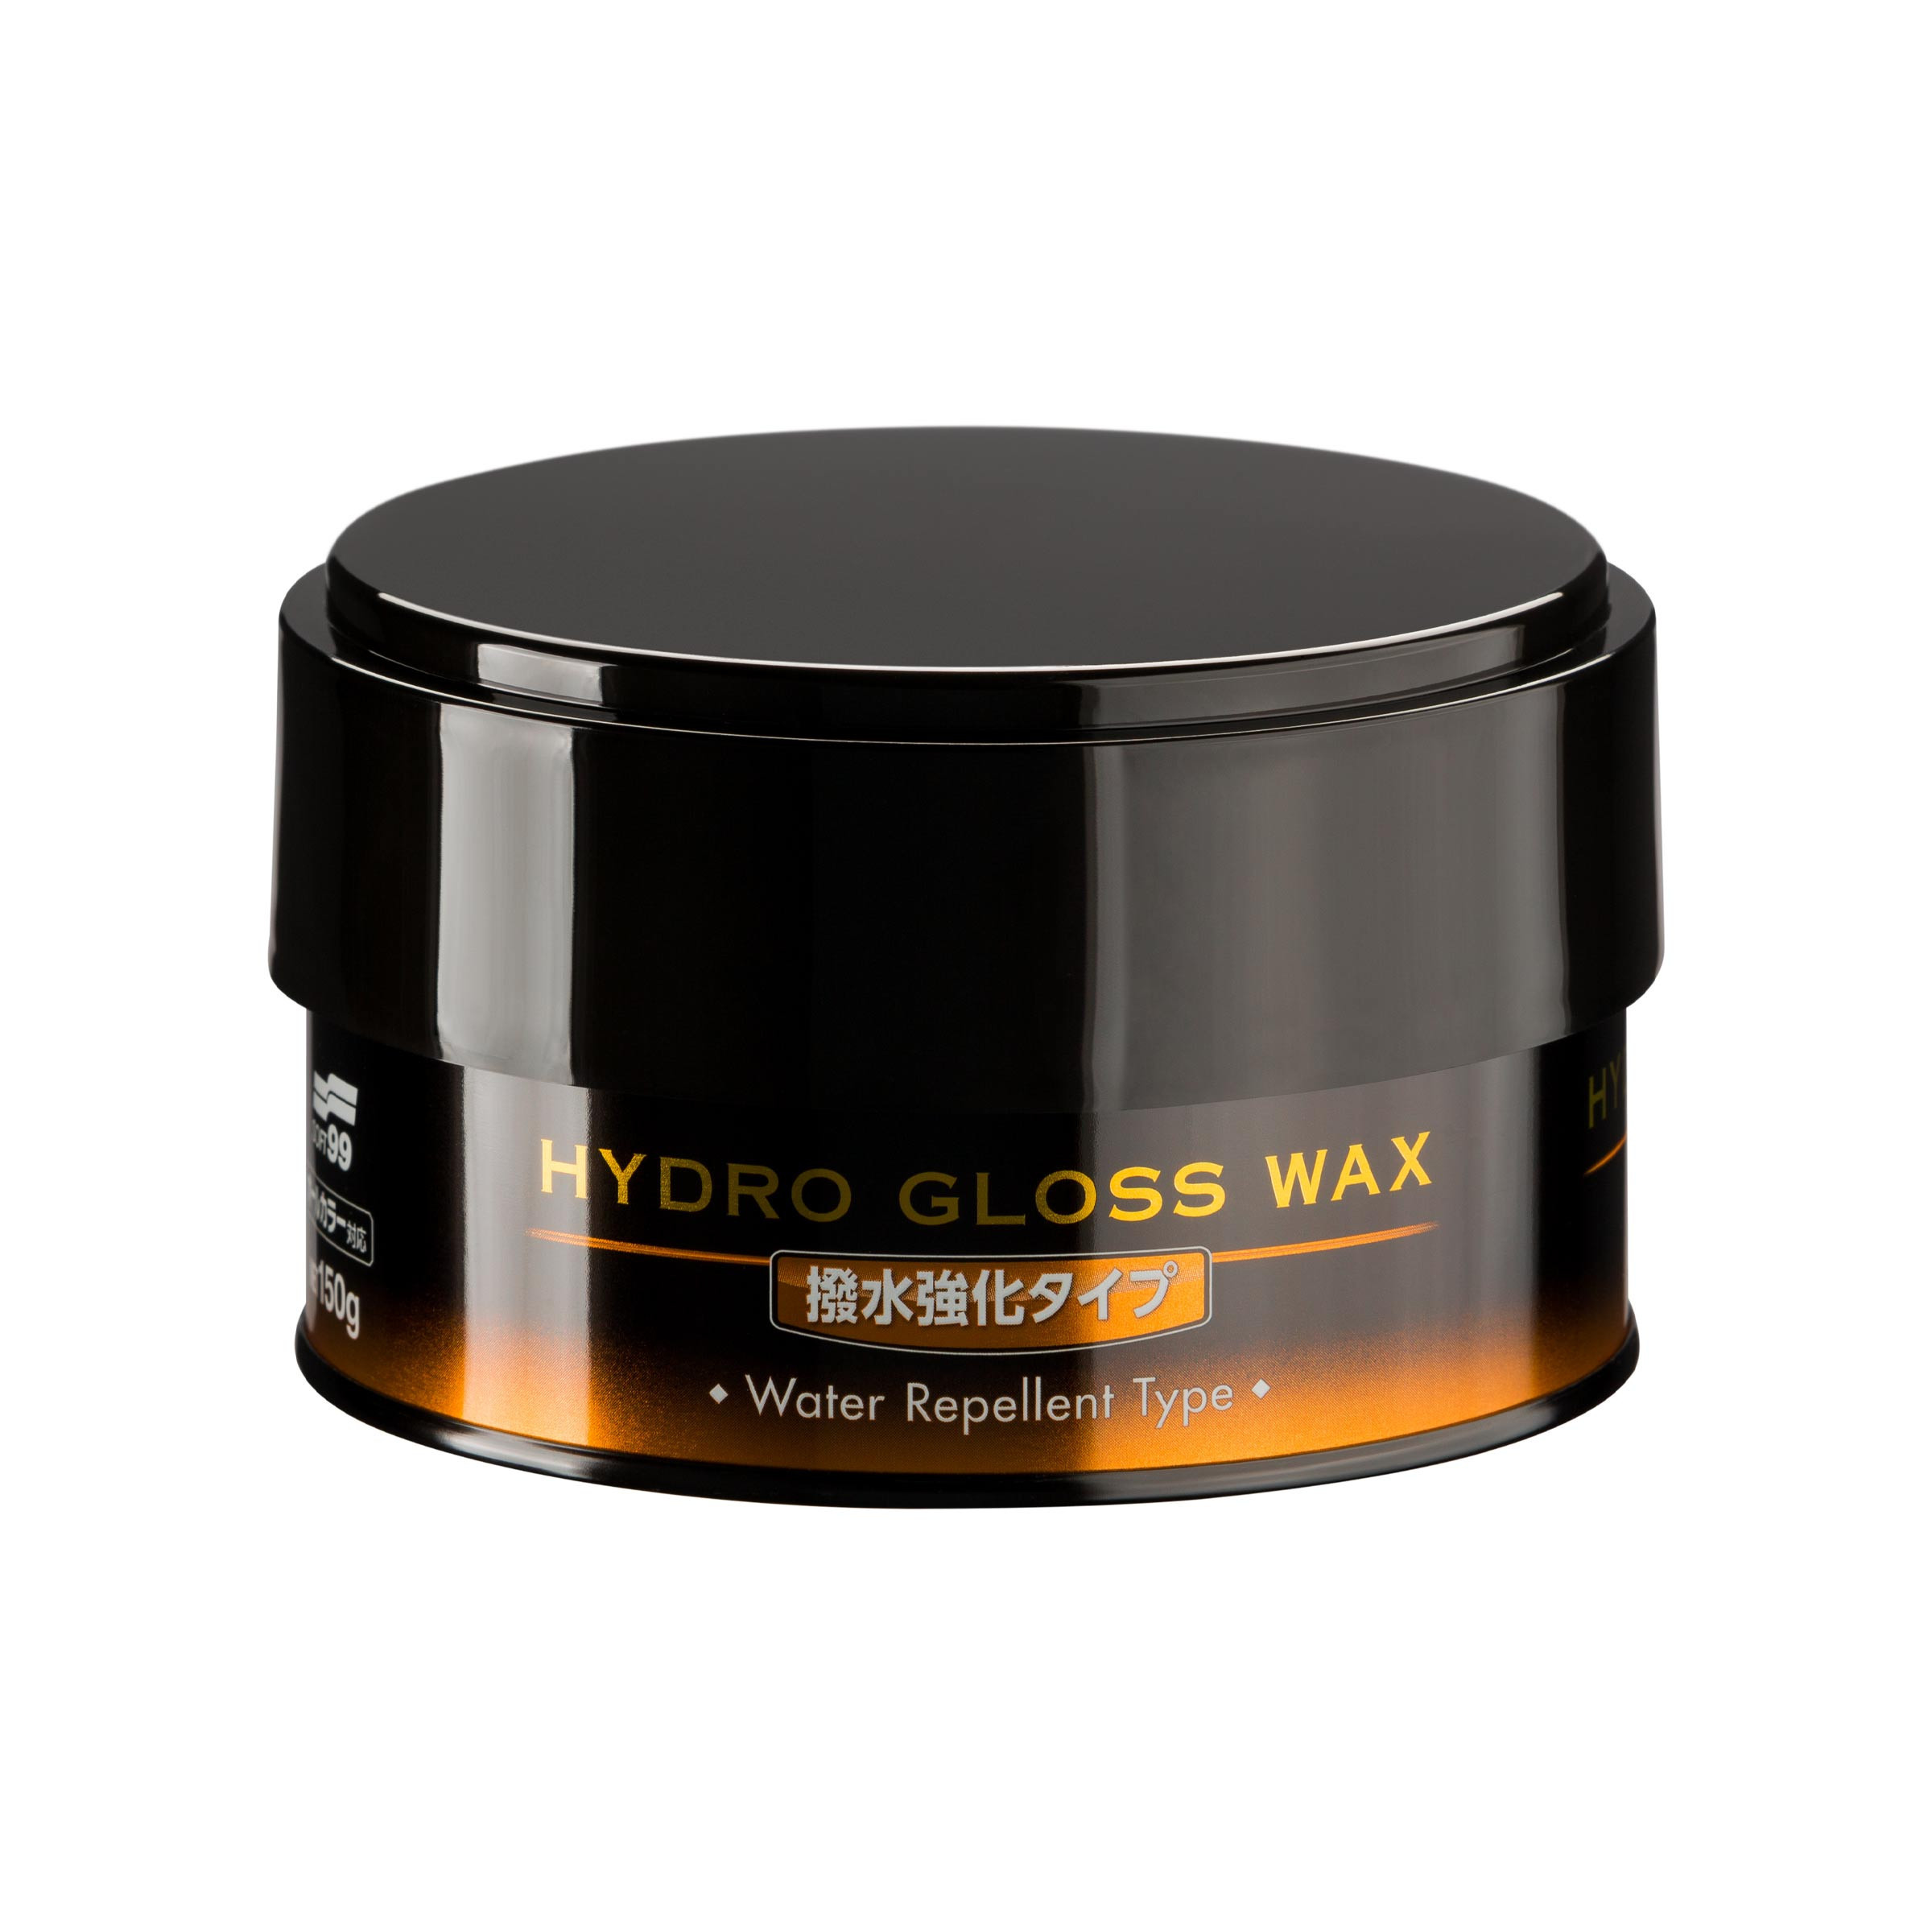 Hydro Gloss Water Repellent, weiches Autowachs, 150 g